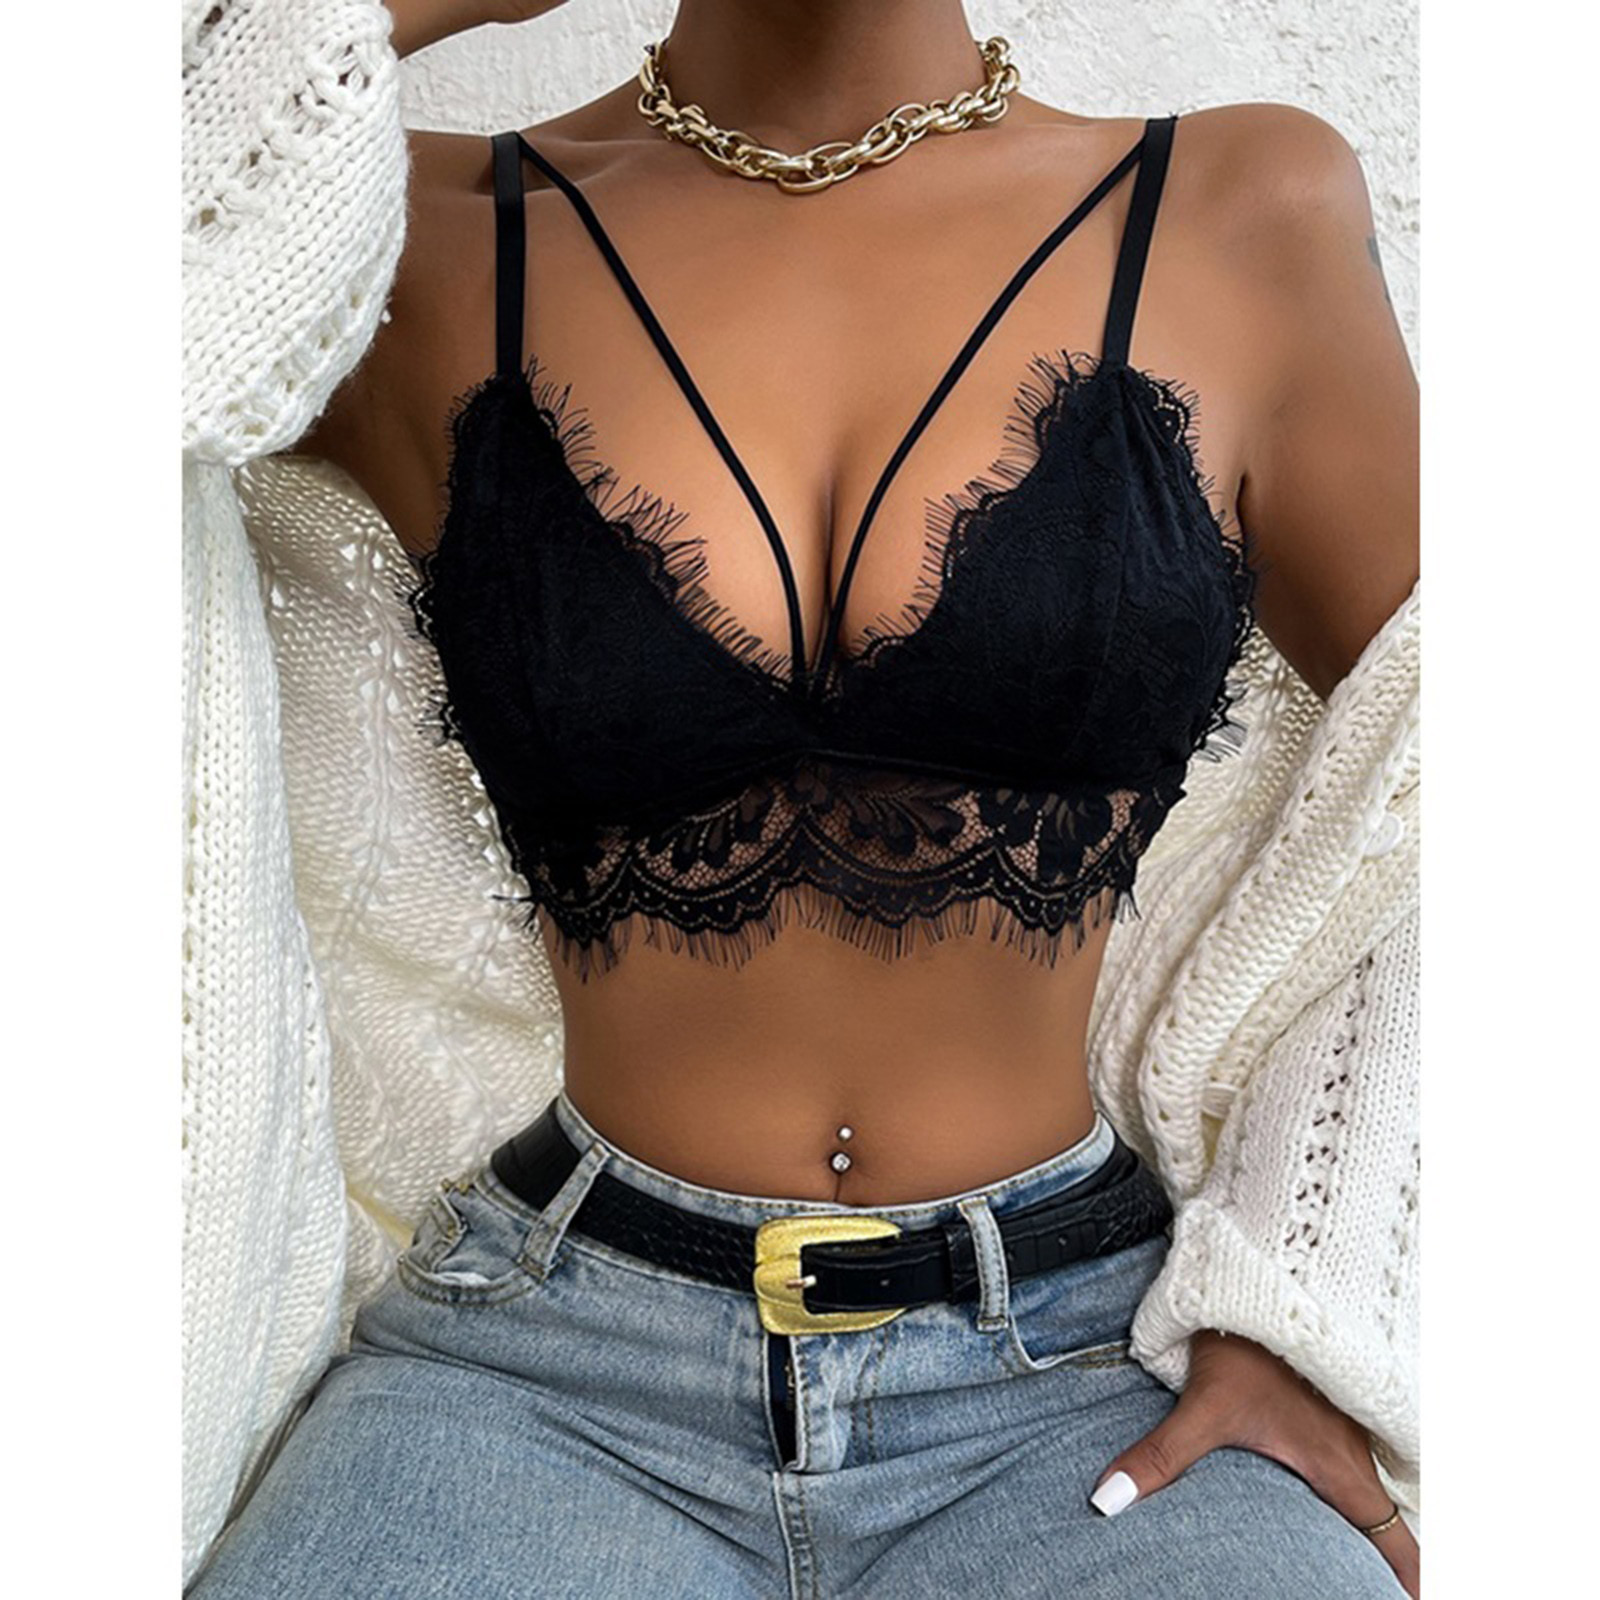 40 Lace Bralette Women Lingerie Backless Top Floral Small Breasts Bustier  Push Up Bra Small Girls Beautiful Underwearb